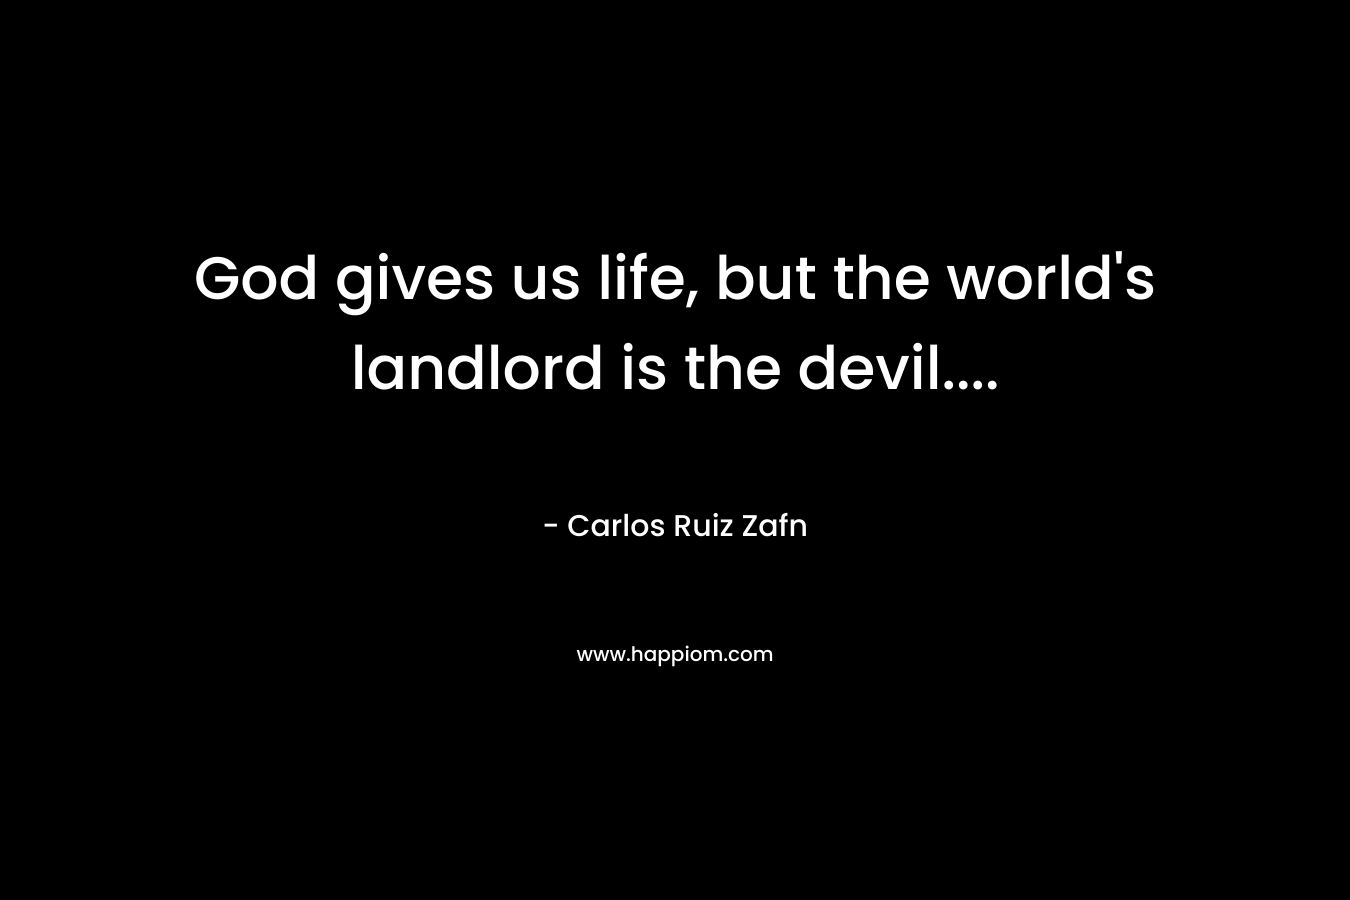 God gives us life, but the world’s landlord is the devil…. – Carlos Ruiz Zafn